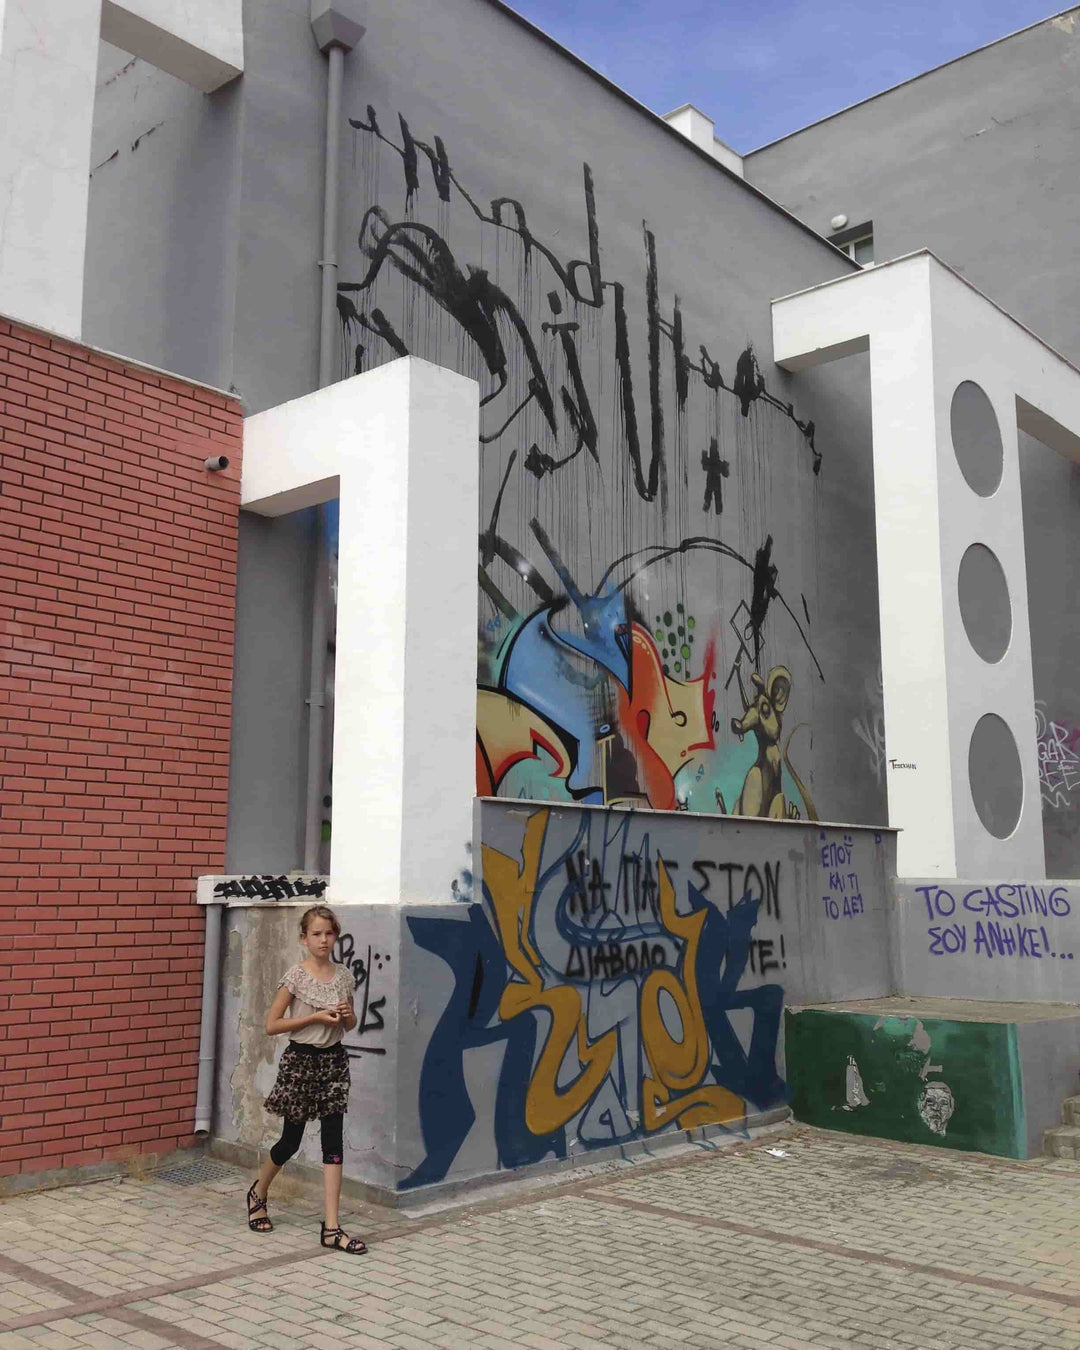 A side view of a building in Greece filled with graffiti